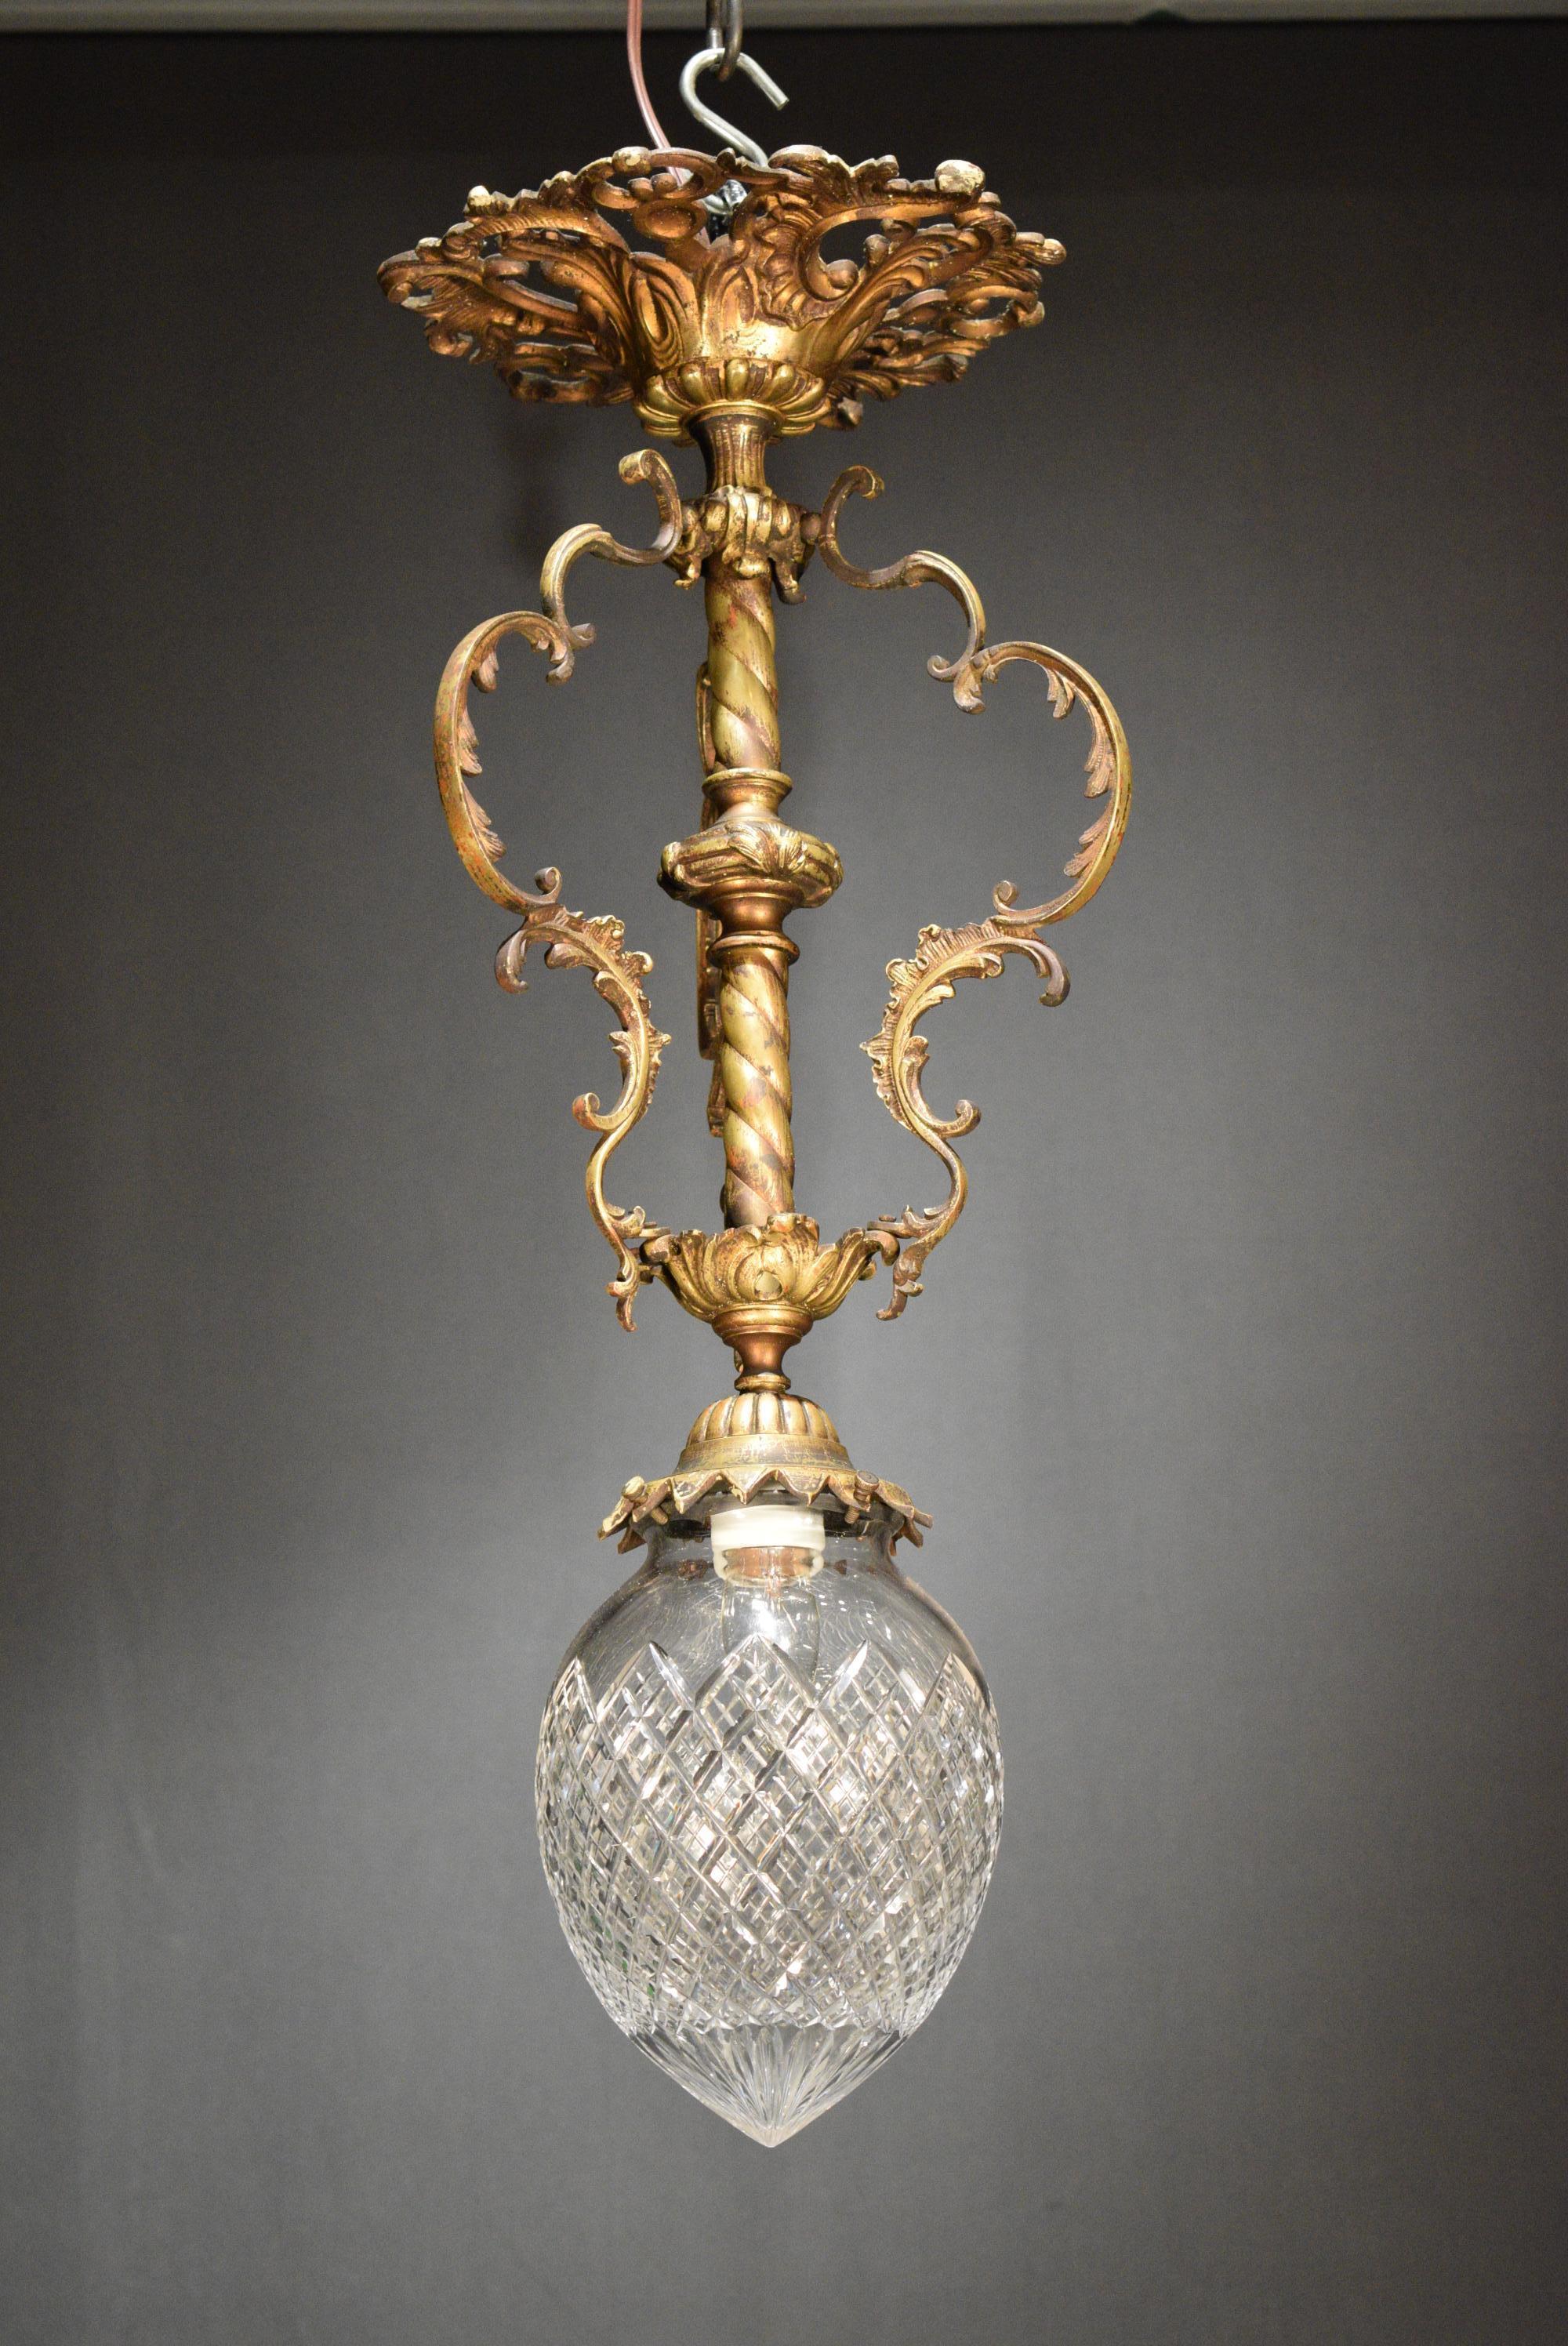 A very fine gilt bronze pendant in the Louis XV style, cut crystal globe.
France, circa 1910.
CW4426.